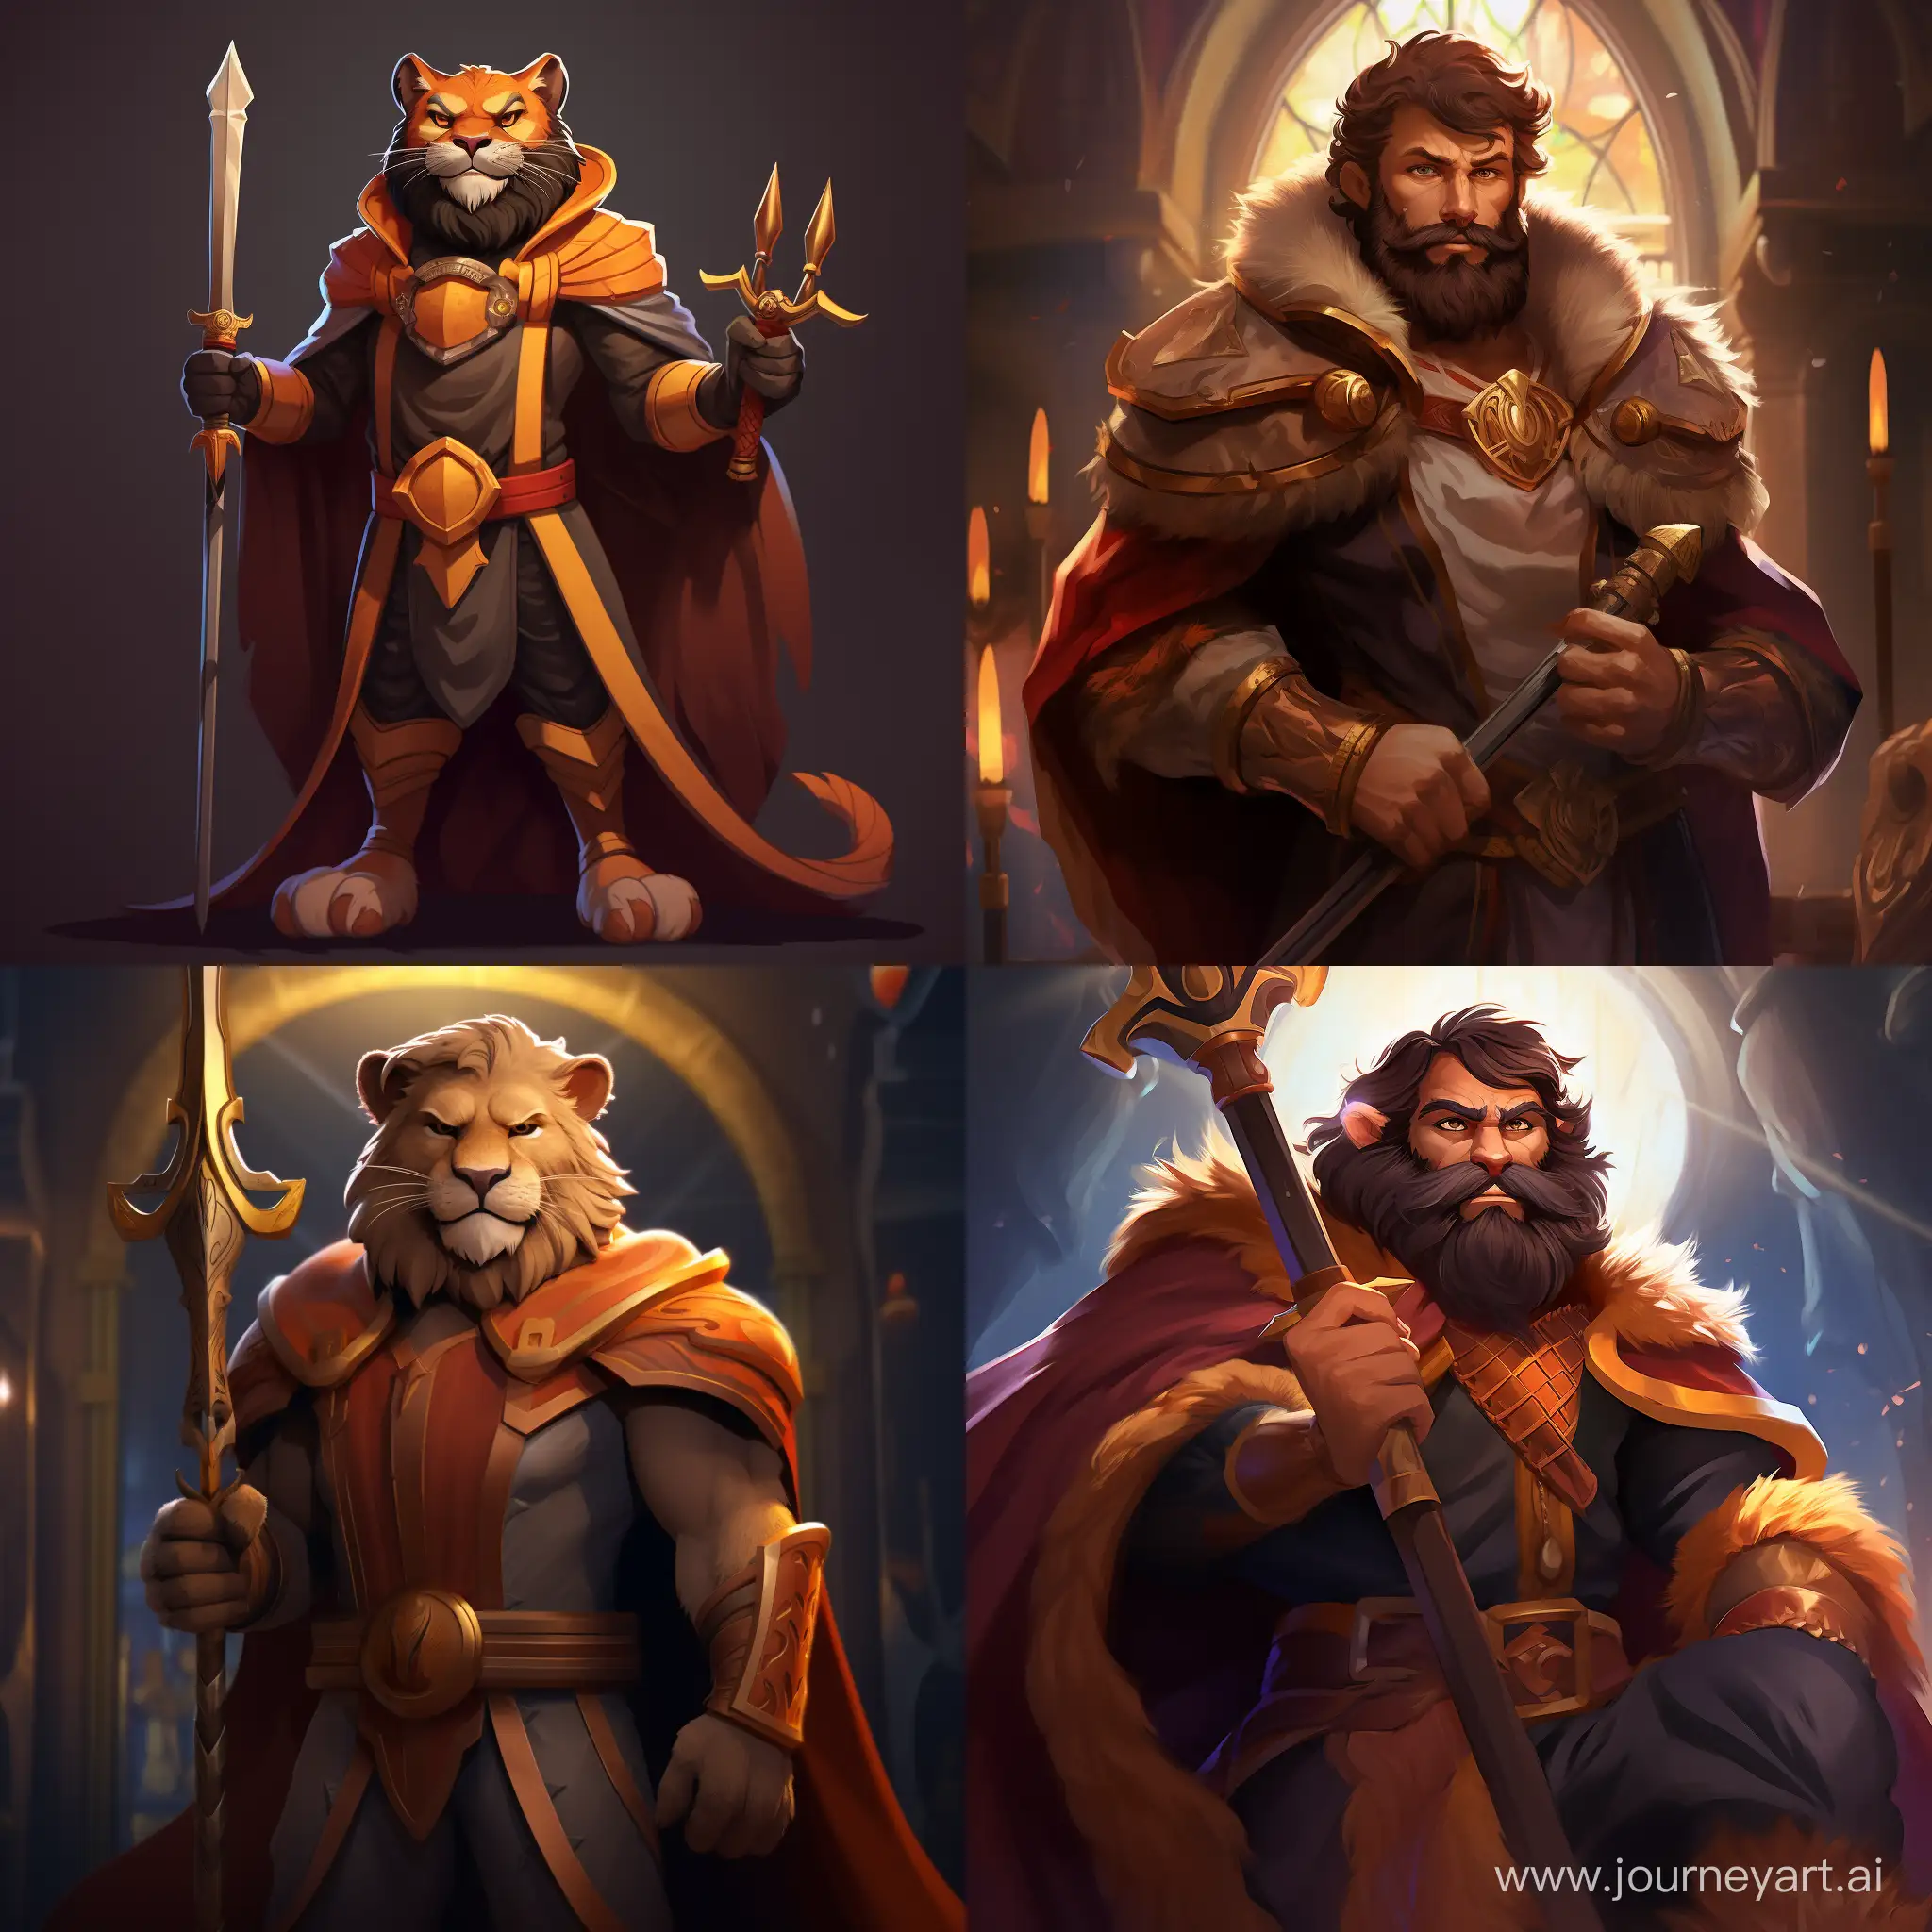 Regal-Cartoon-Character-with-Sword-and-Cape-Altoon-Sultan-Inspired-Concept-Art